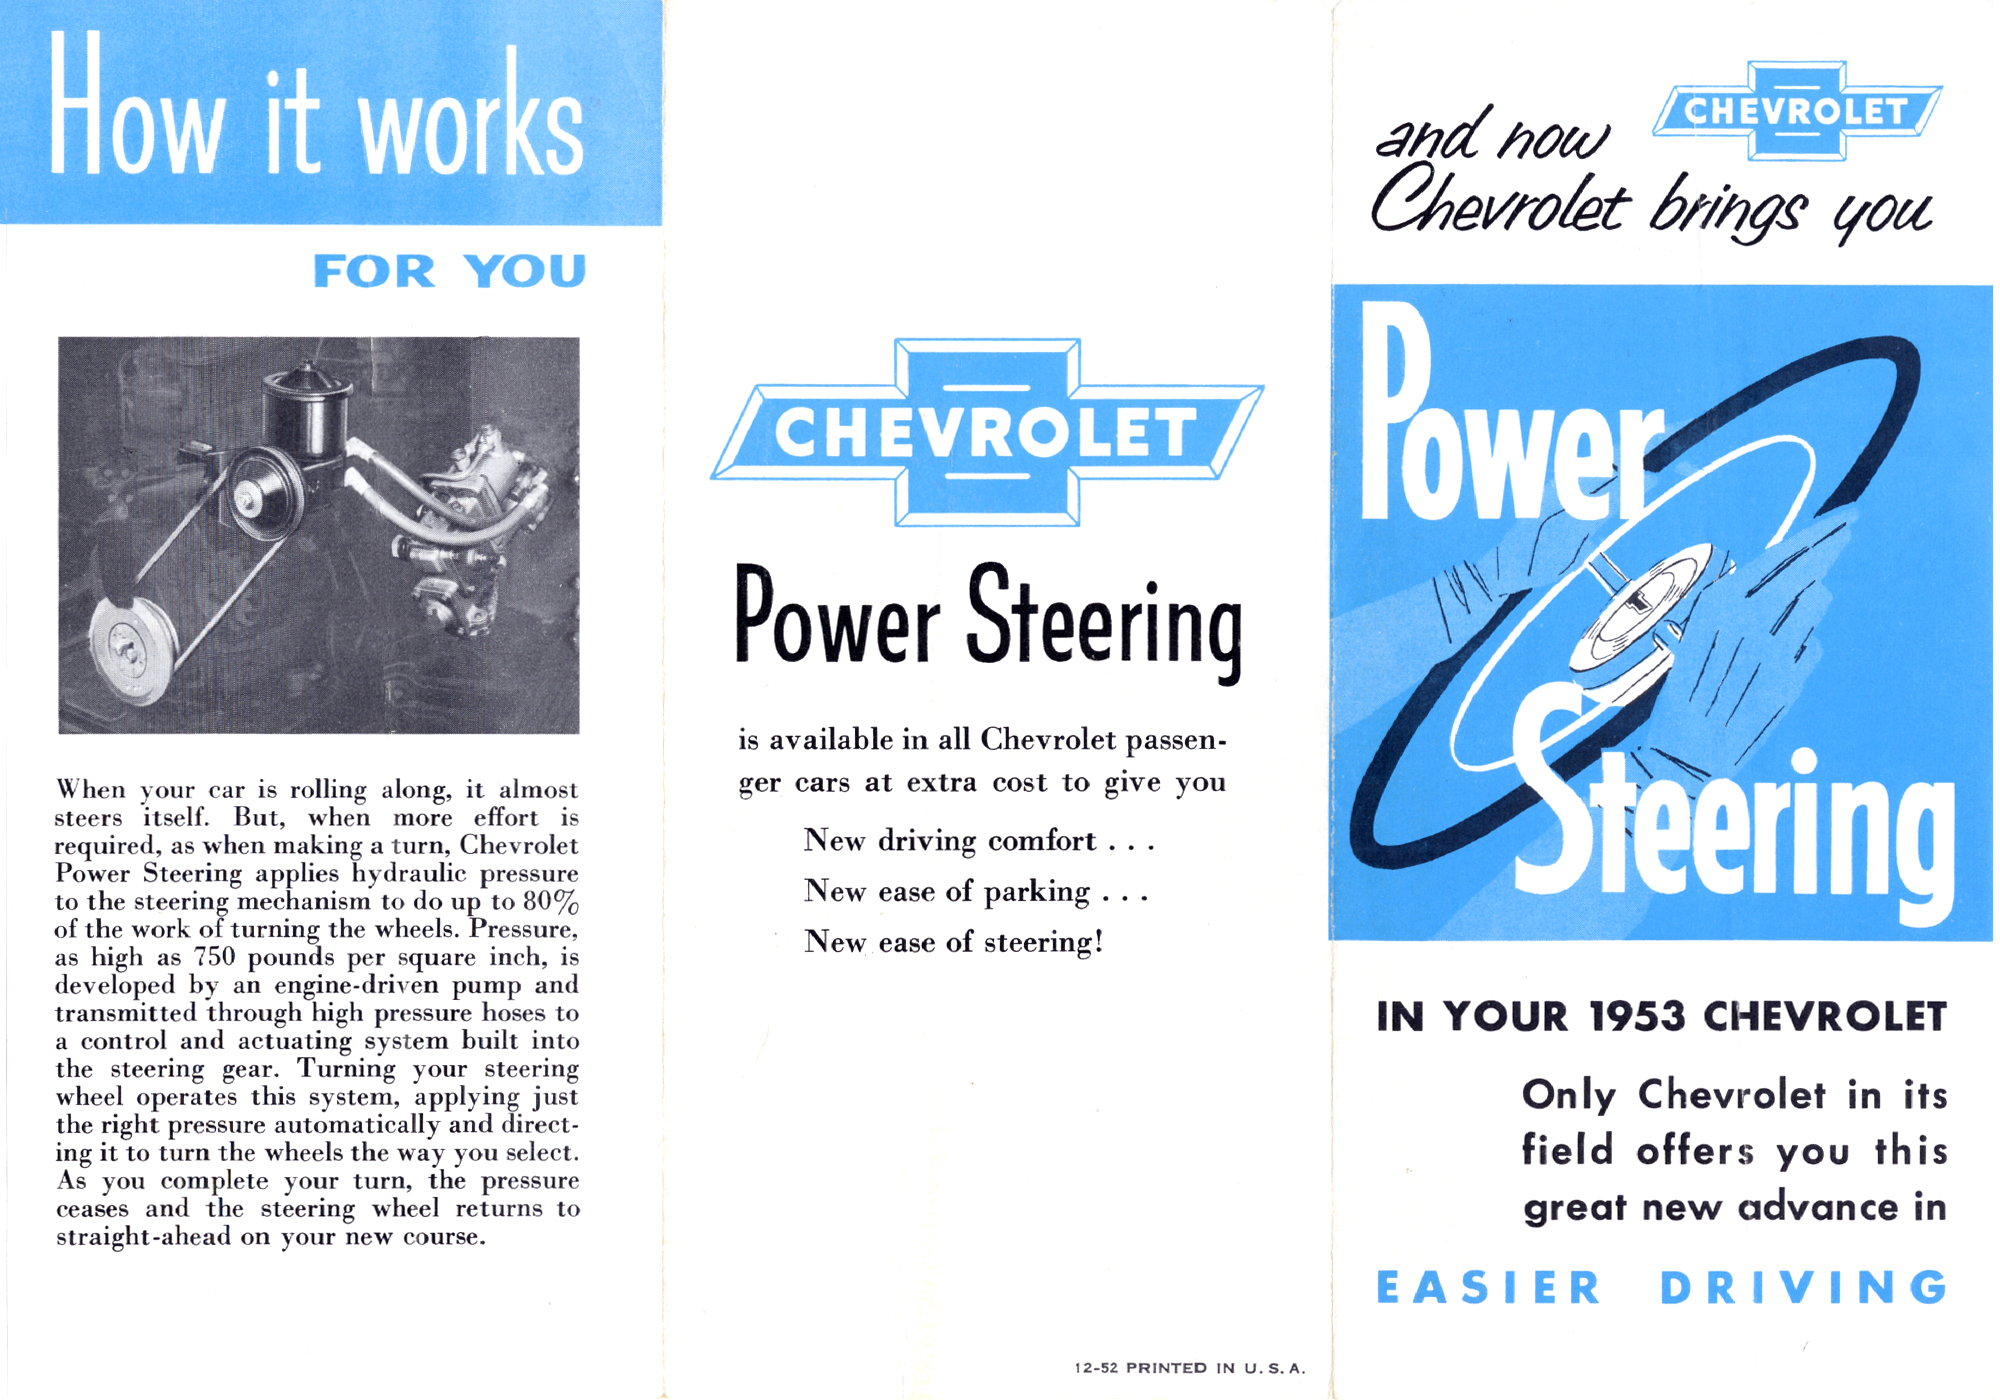 1953 Chevrolet Power Steering Page 2